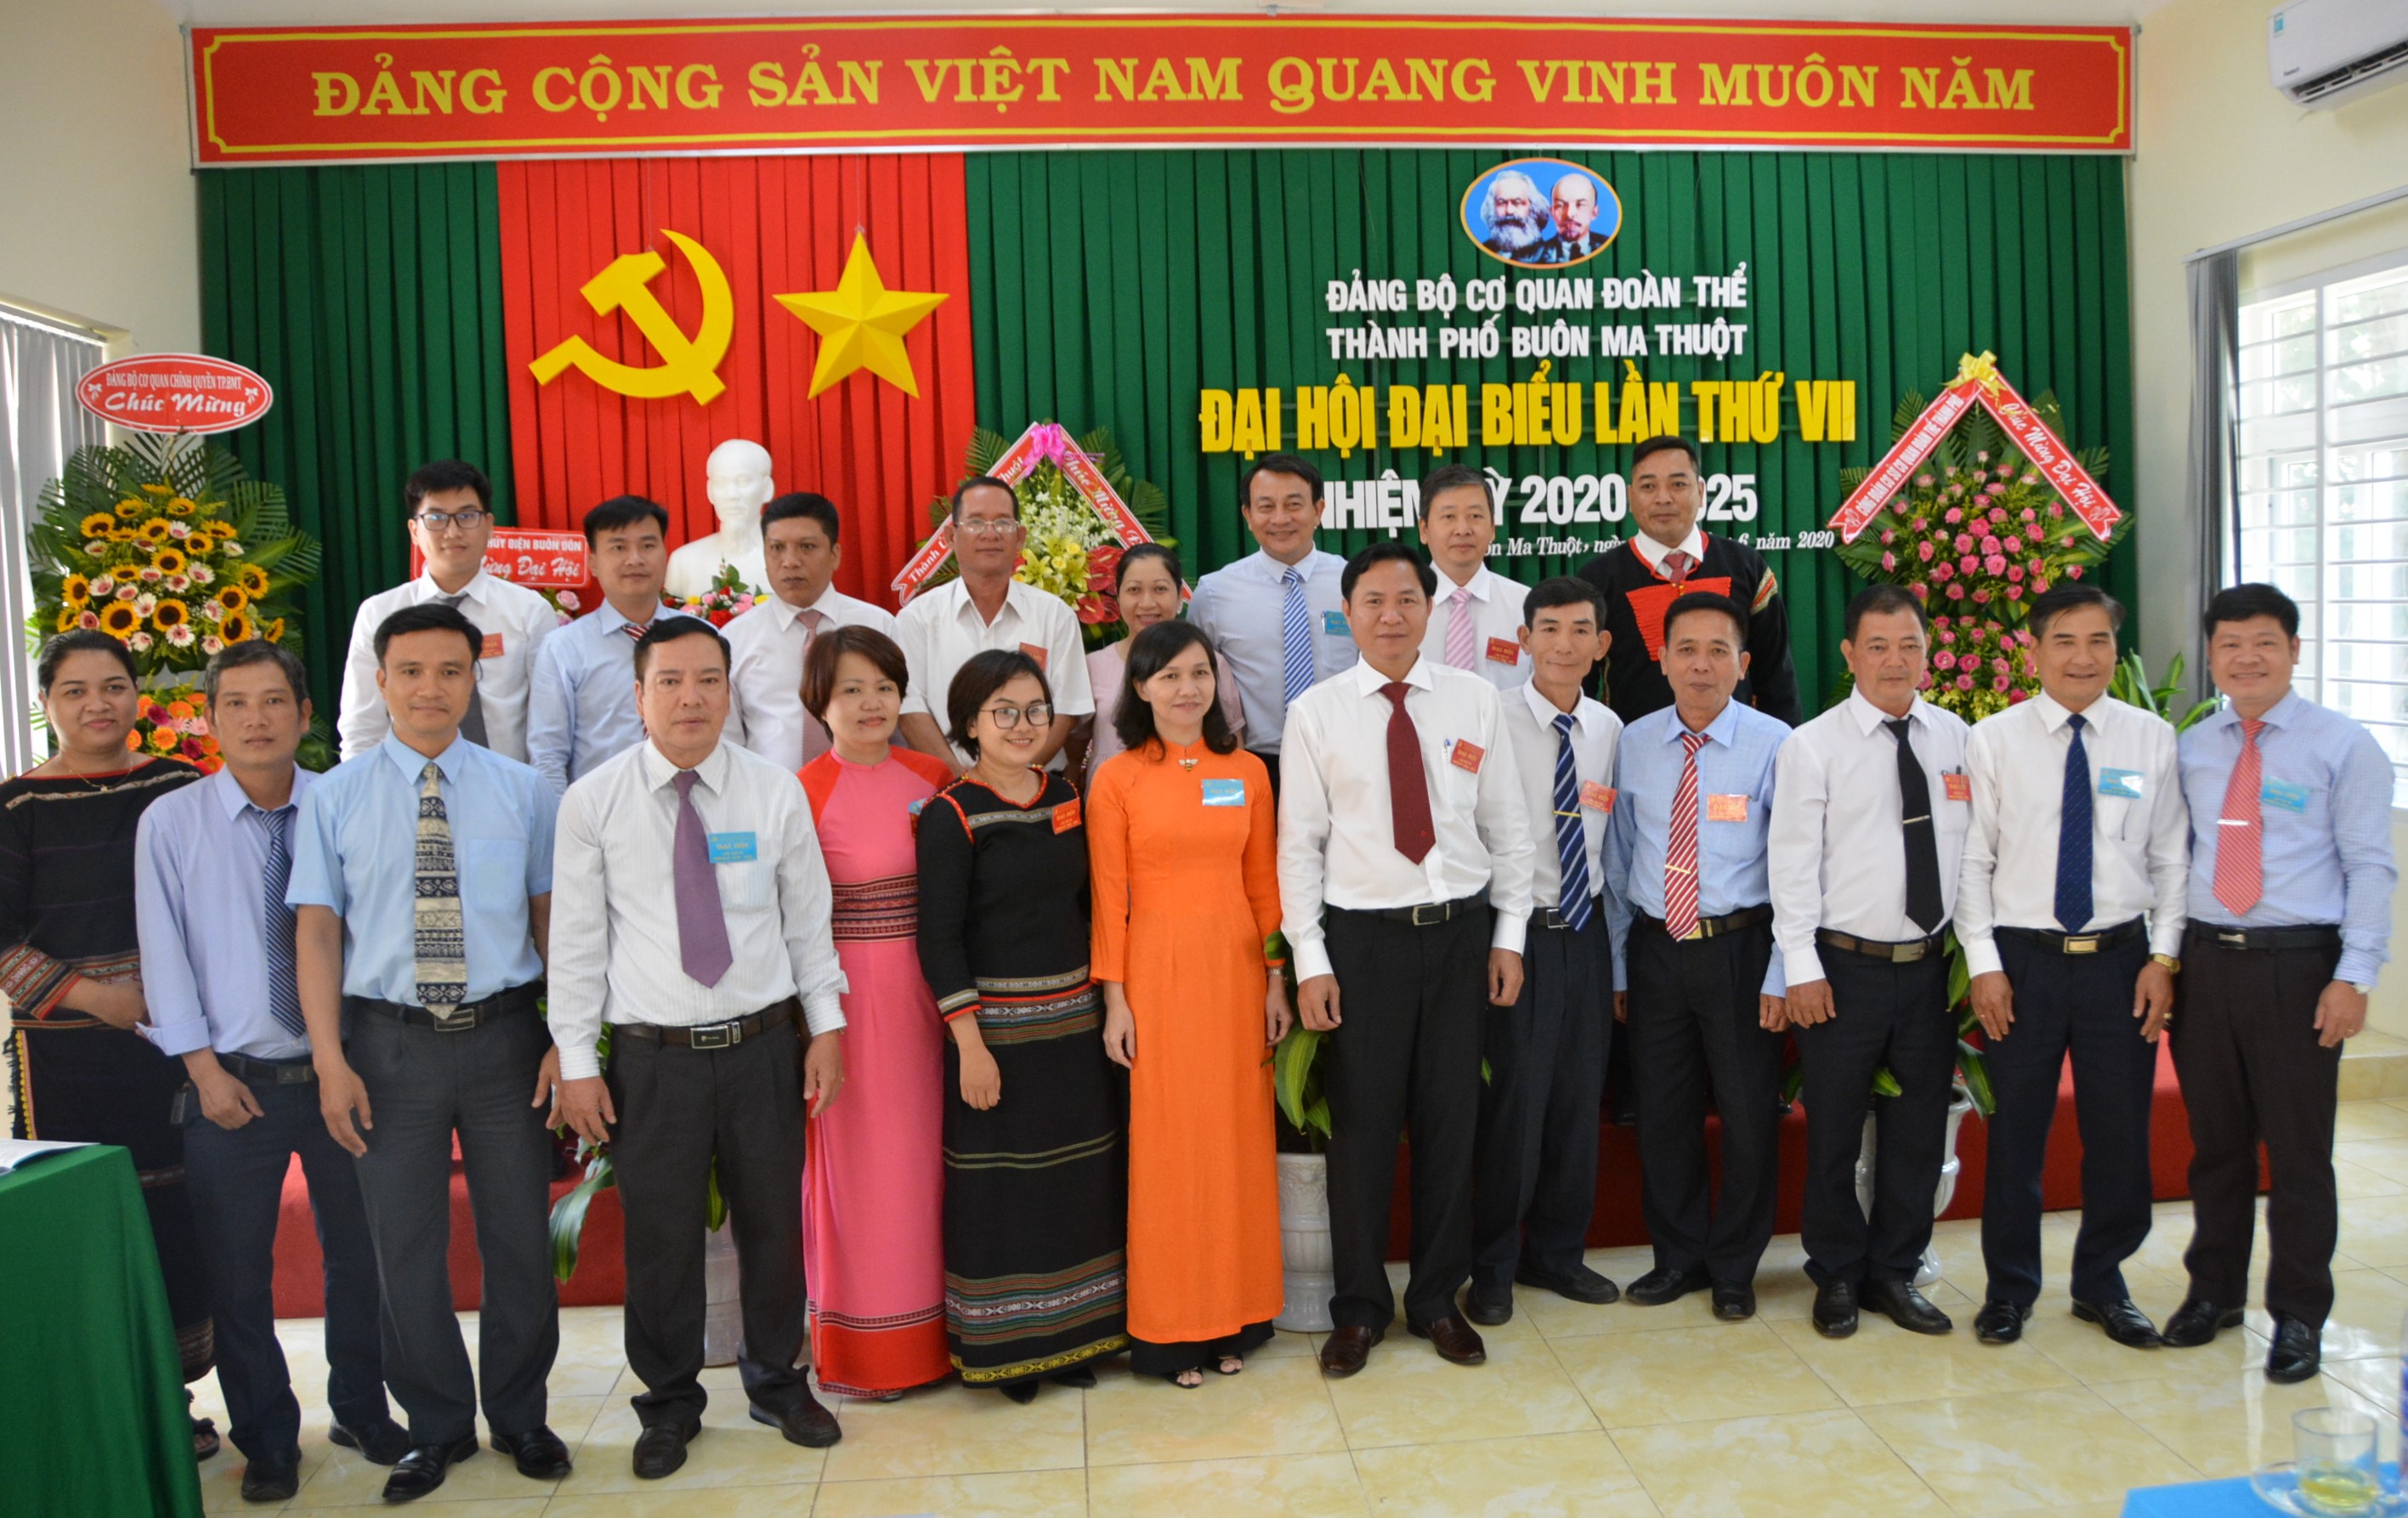 The Party Congress of the party Committee Buon Ma Thuot City Unions and Agencies Bloc, term 2020 - 2025